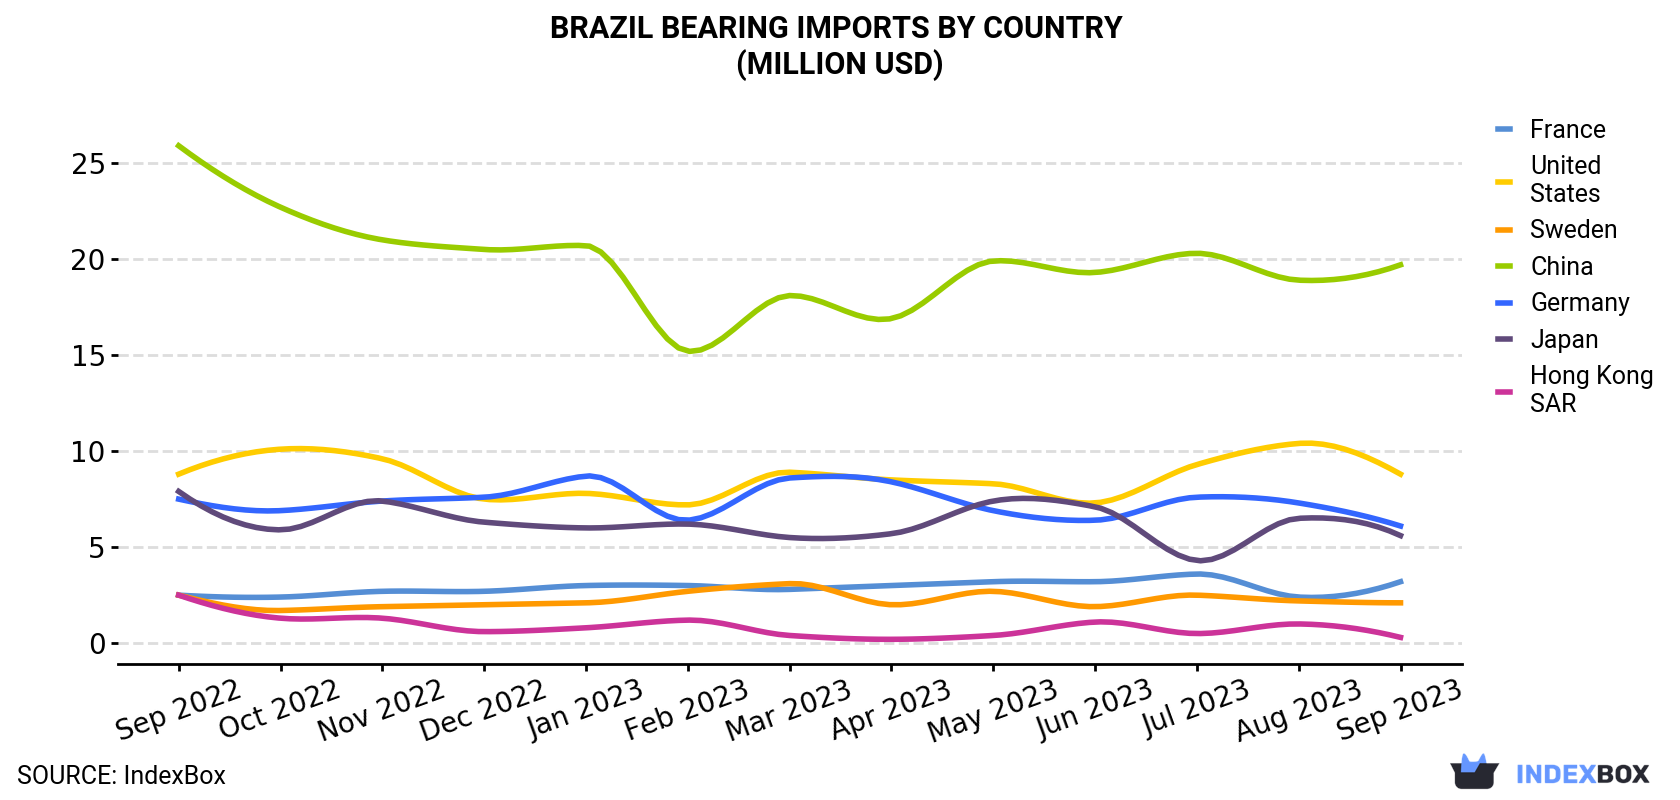 Brazil Bearing Imports By Country (Million USD)